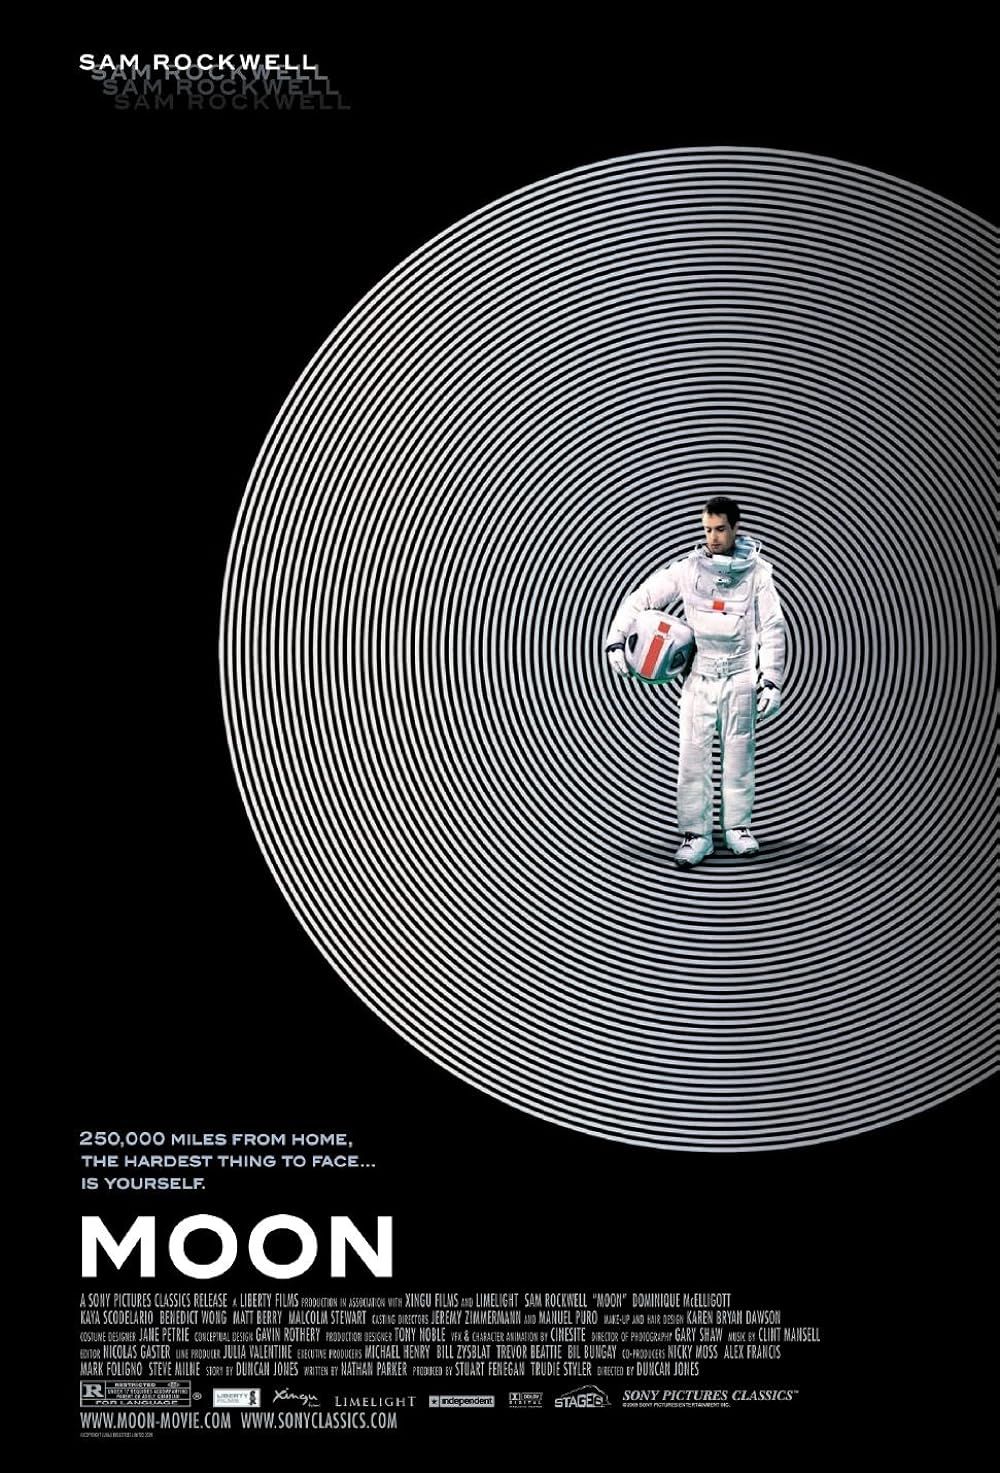 The poster for the movie Moon